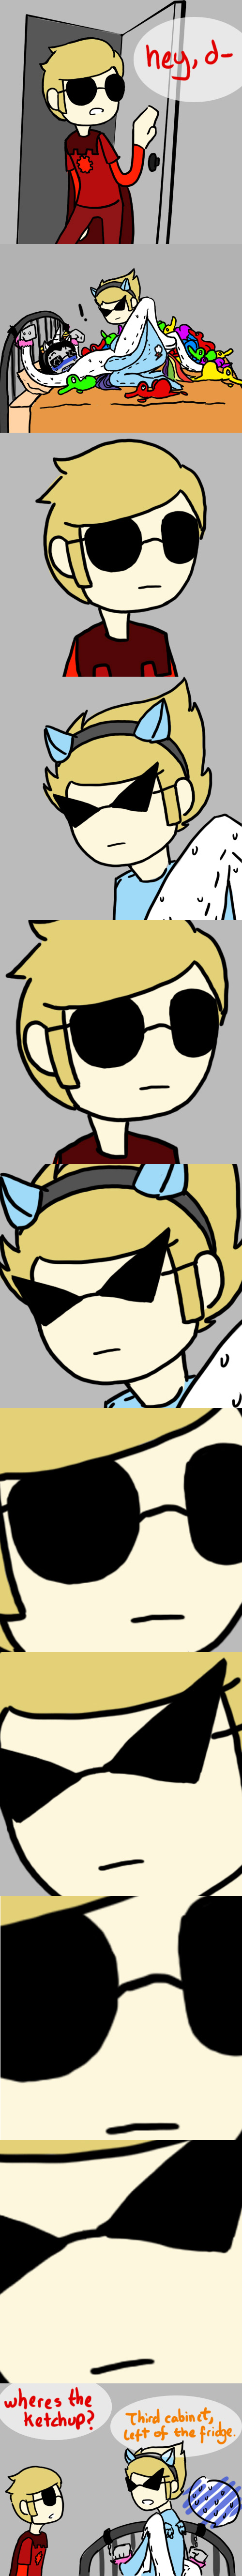 ! animal_ears blush comic dave_strider dirk_strider equius_zahhak iicel my_little_pony pony_pals redrom shipping smuppets word_balloon